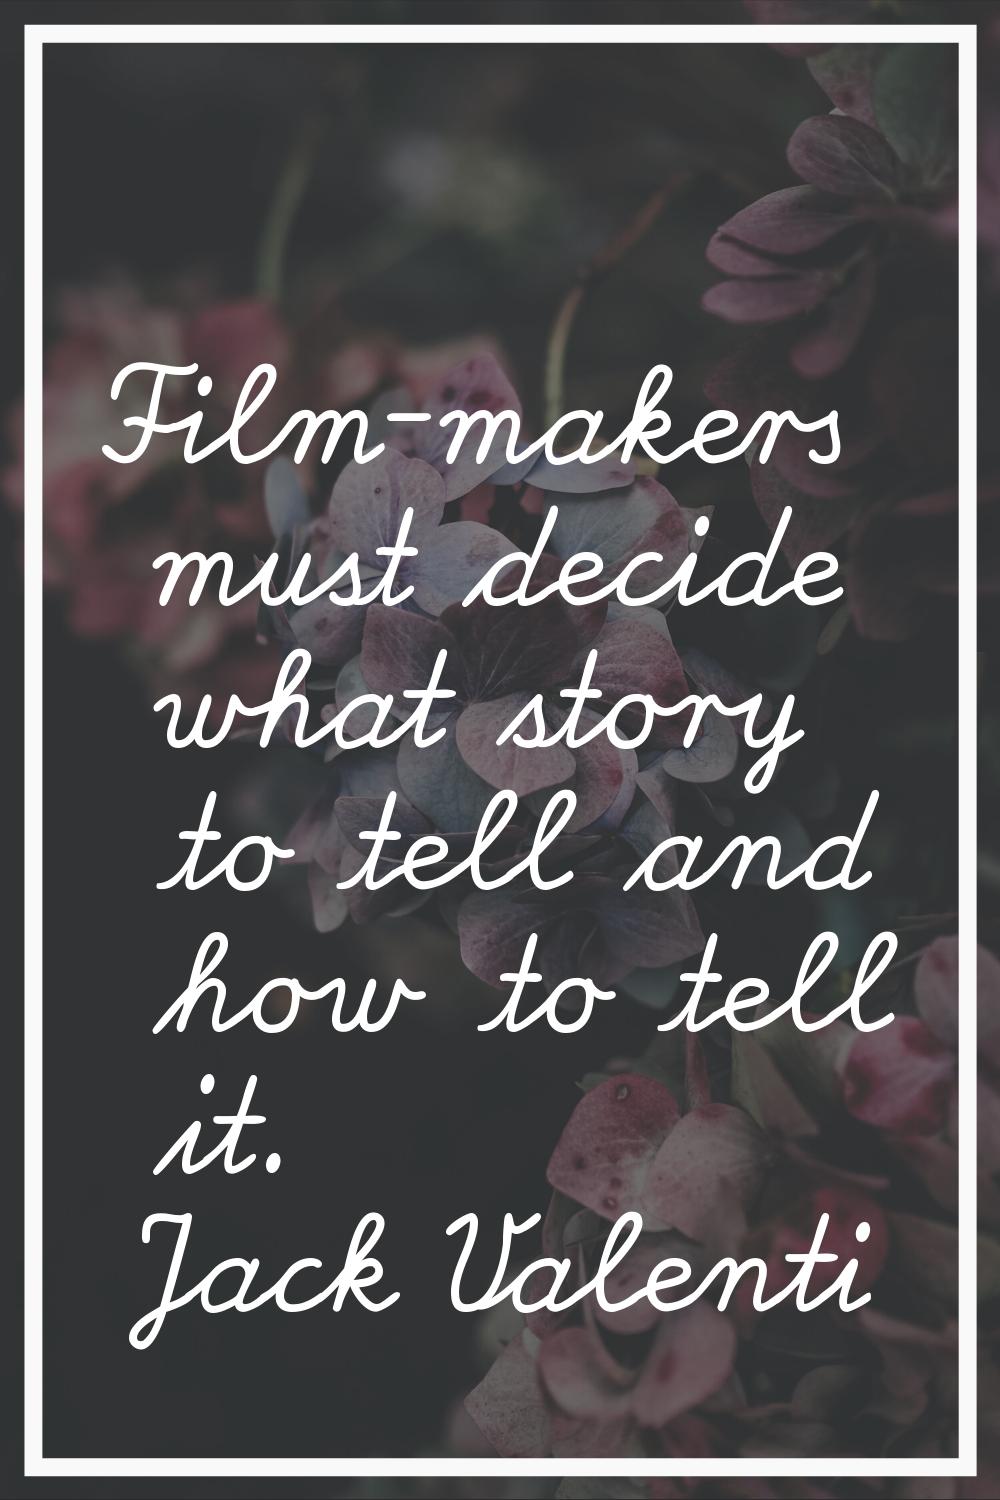 Film-makers must decide what story to tell and how to tell it.